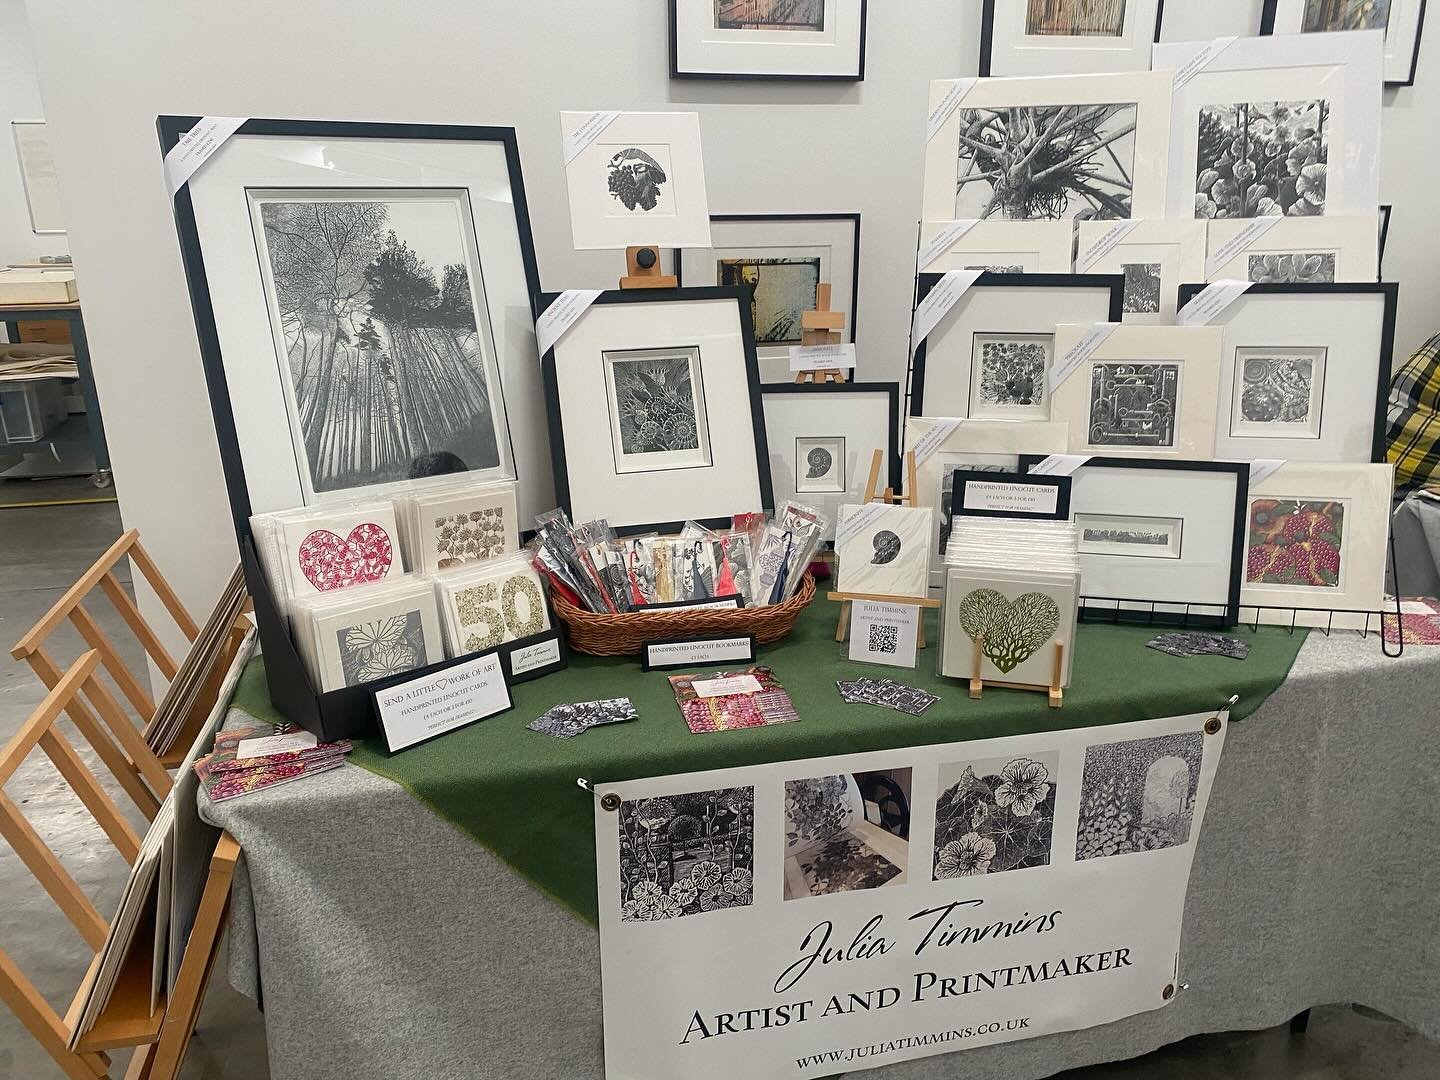 All set up @ikongallery ready for the print fair today, feeling inspired by so many lovely printmakers here! Great to be near to @claresprints too. It&rsquo;s open until 4pm if you are in Birmingham, it&rsquo;s well worth visiting #printfair #printma